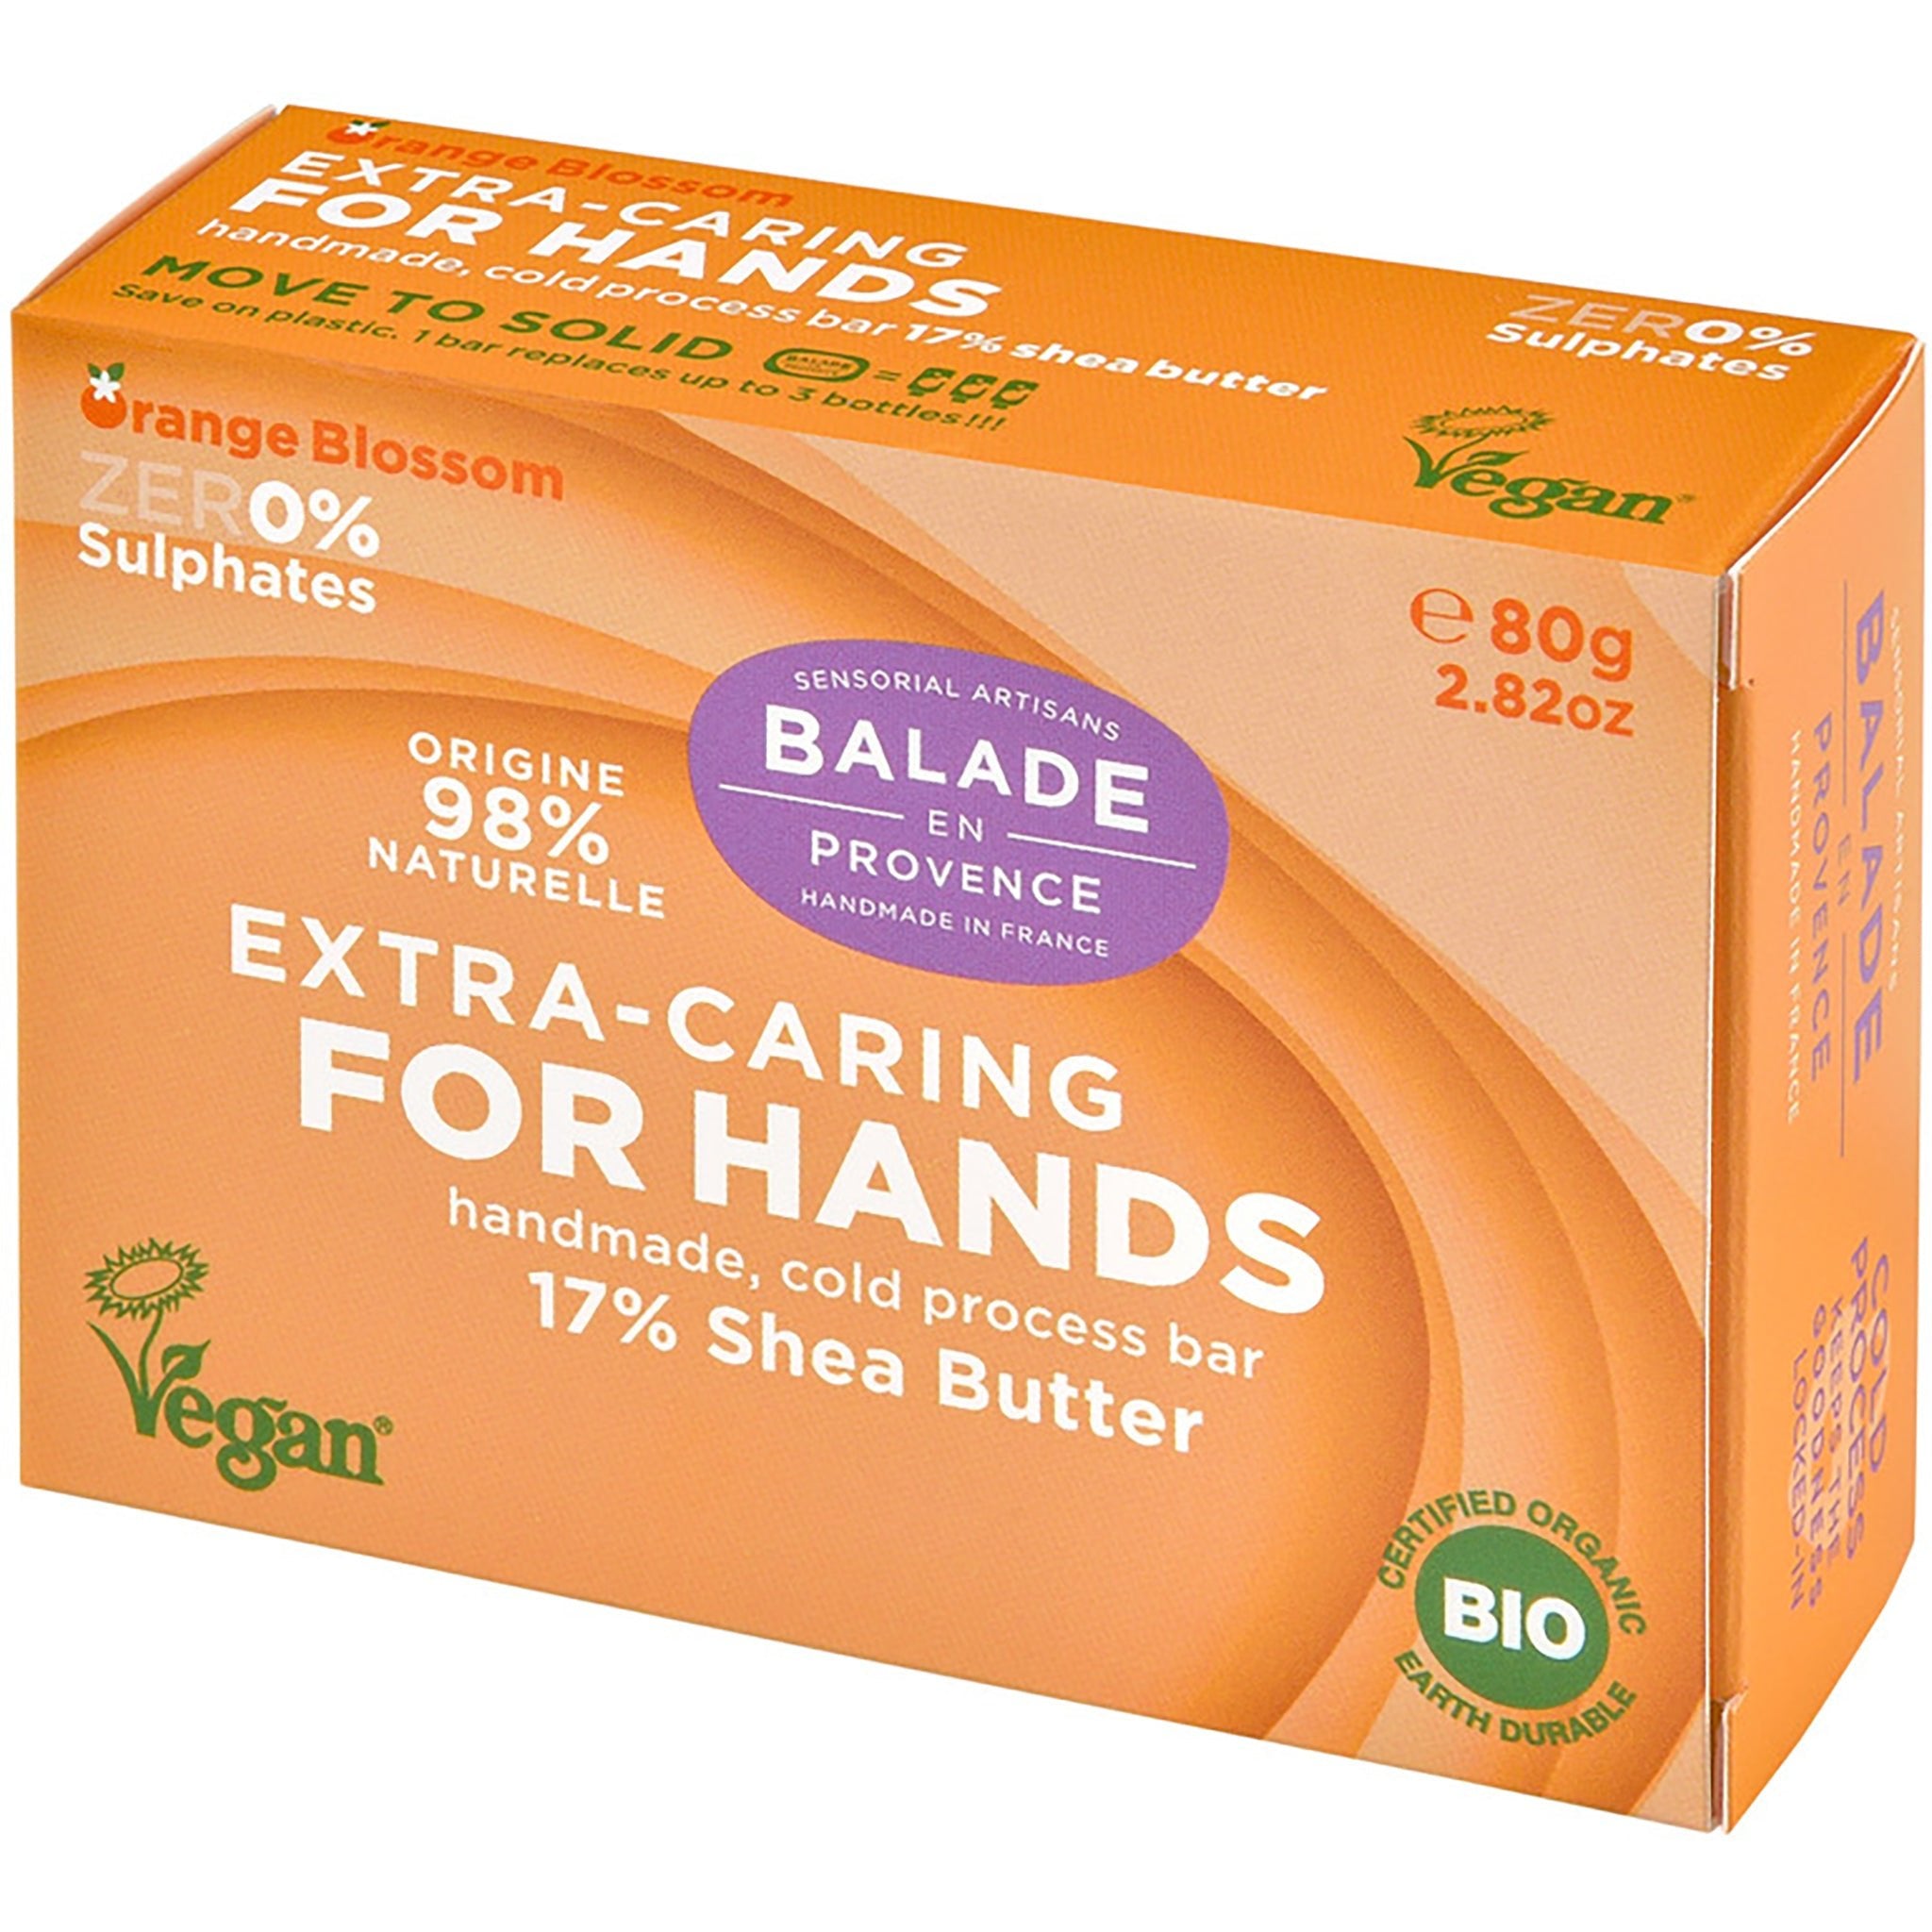 Solid Hand Bar | Extra-Caring - mypure.co.uk